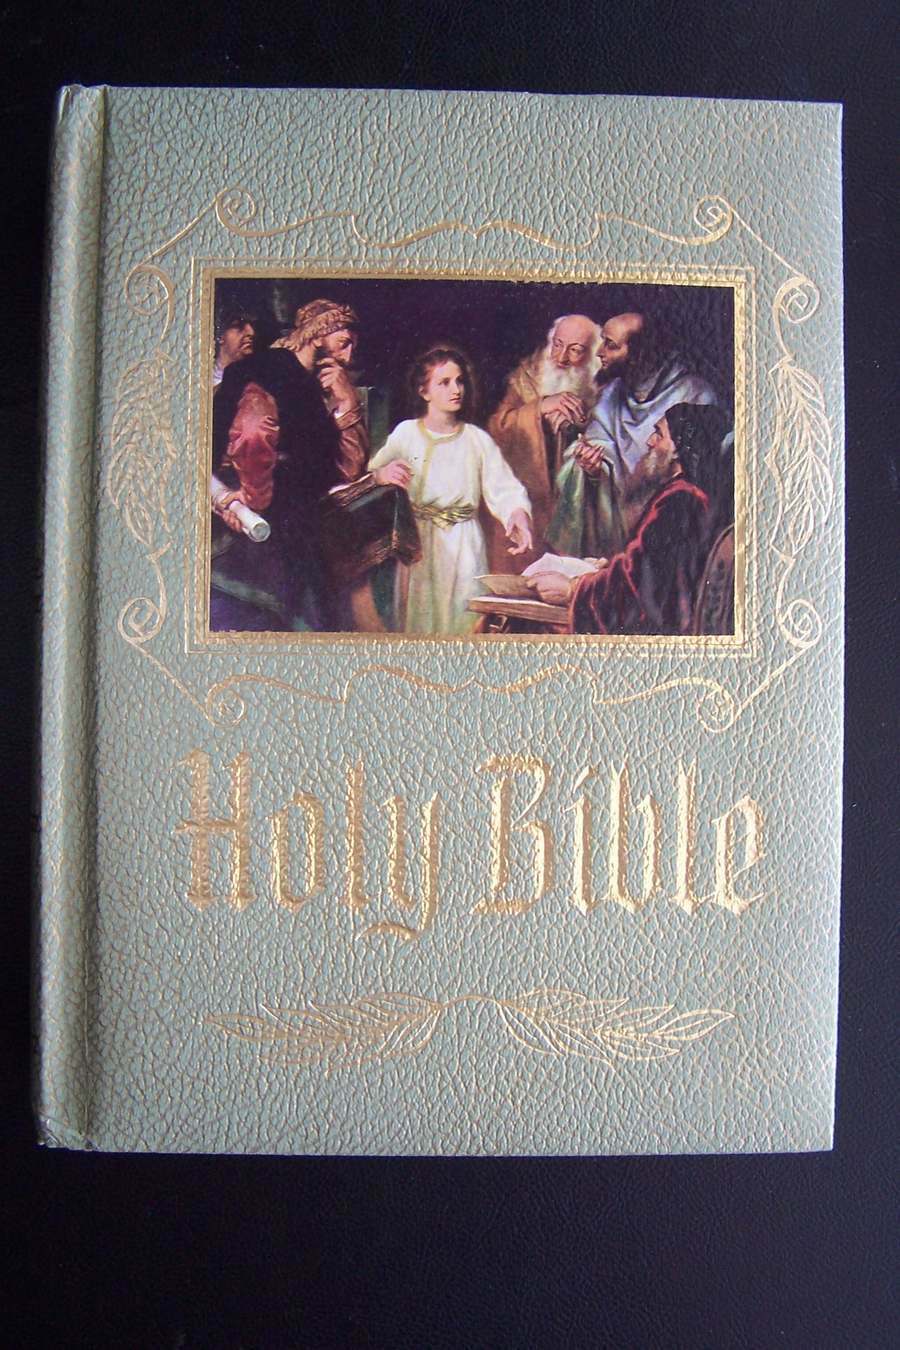 Primary image for Holy Bible, Catholic Heirloom Edition Leather Bound 1984-85 Edition